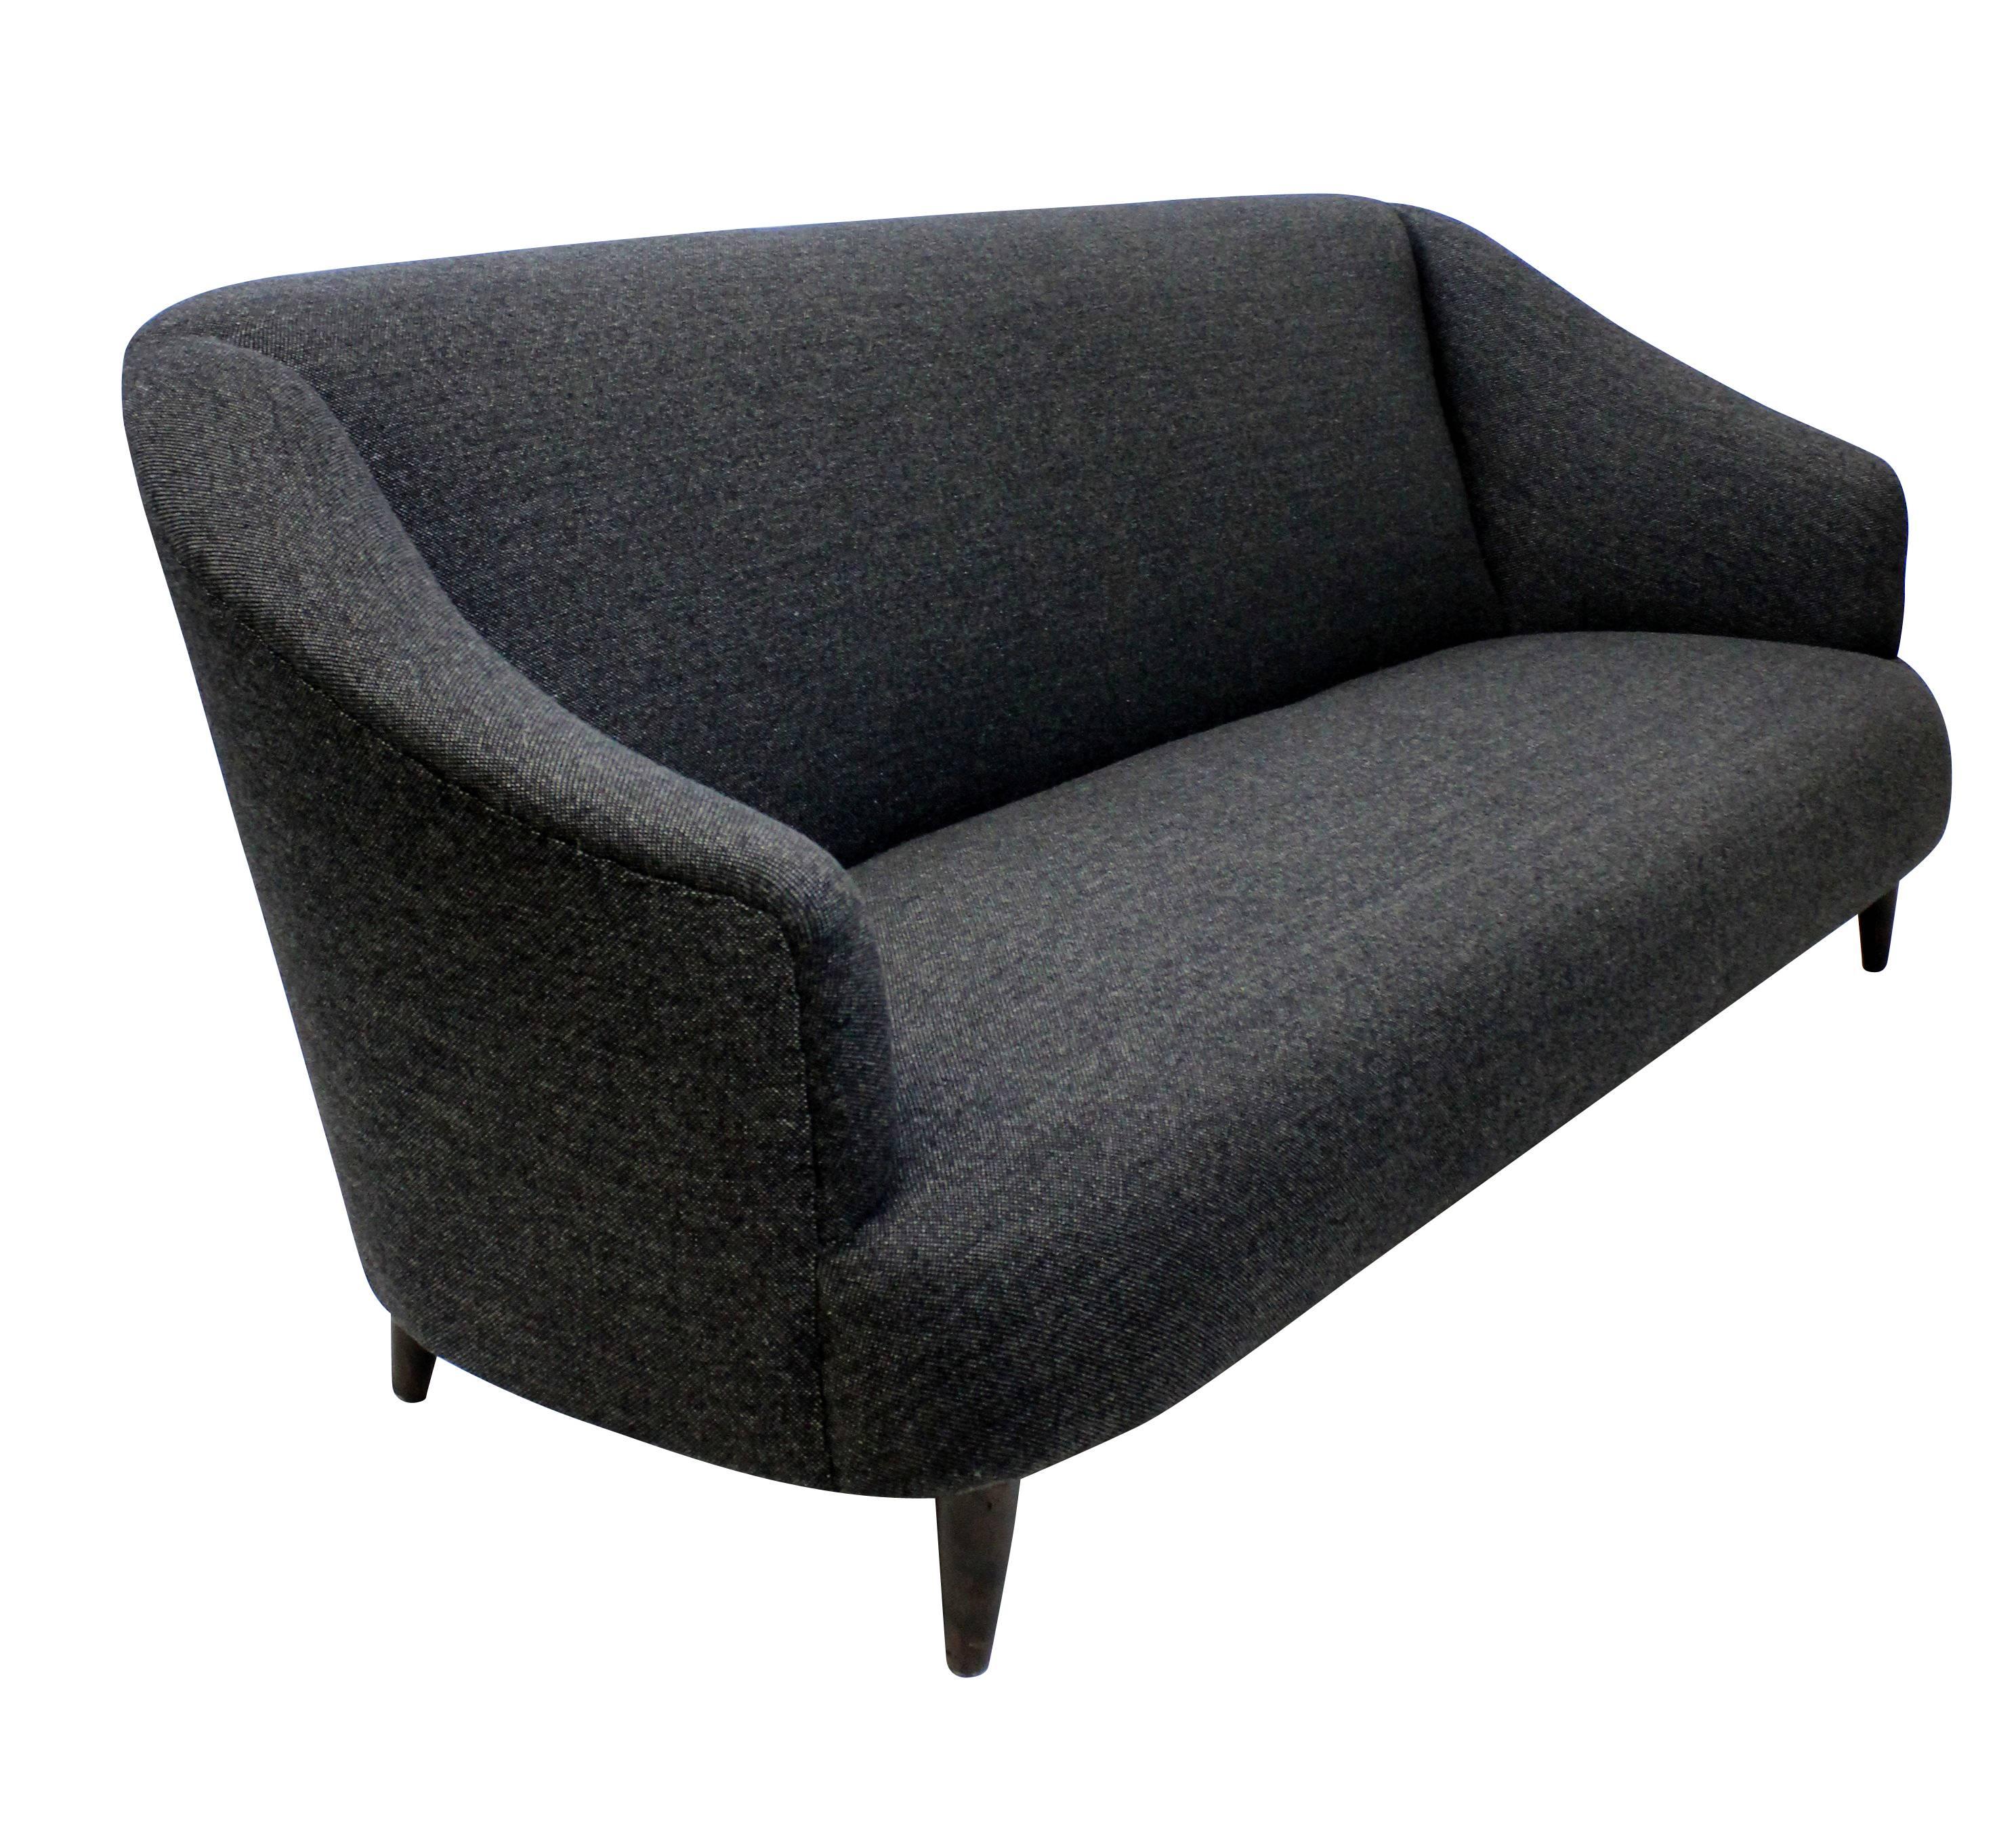 A large sculptural three-seat settee by Ulrich. Newly upholstered in dark grey wool.